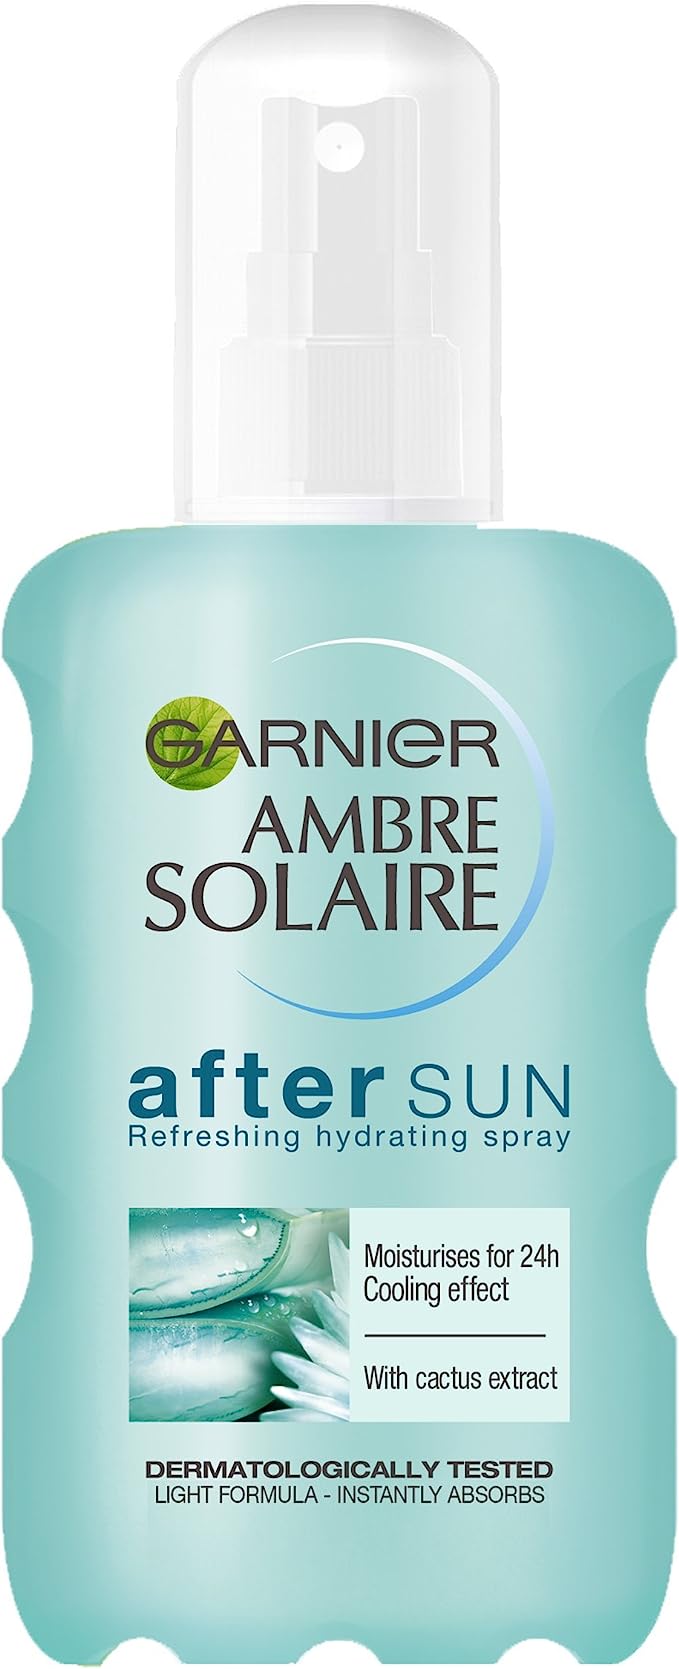 Garnier Ambre Solaire After Sun Spray, Soothing and Calming Aftersun Enriched With Aloe Vera, Easy to Use Spray Format 200 ml